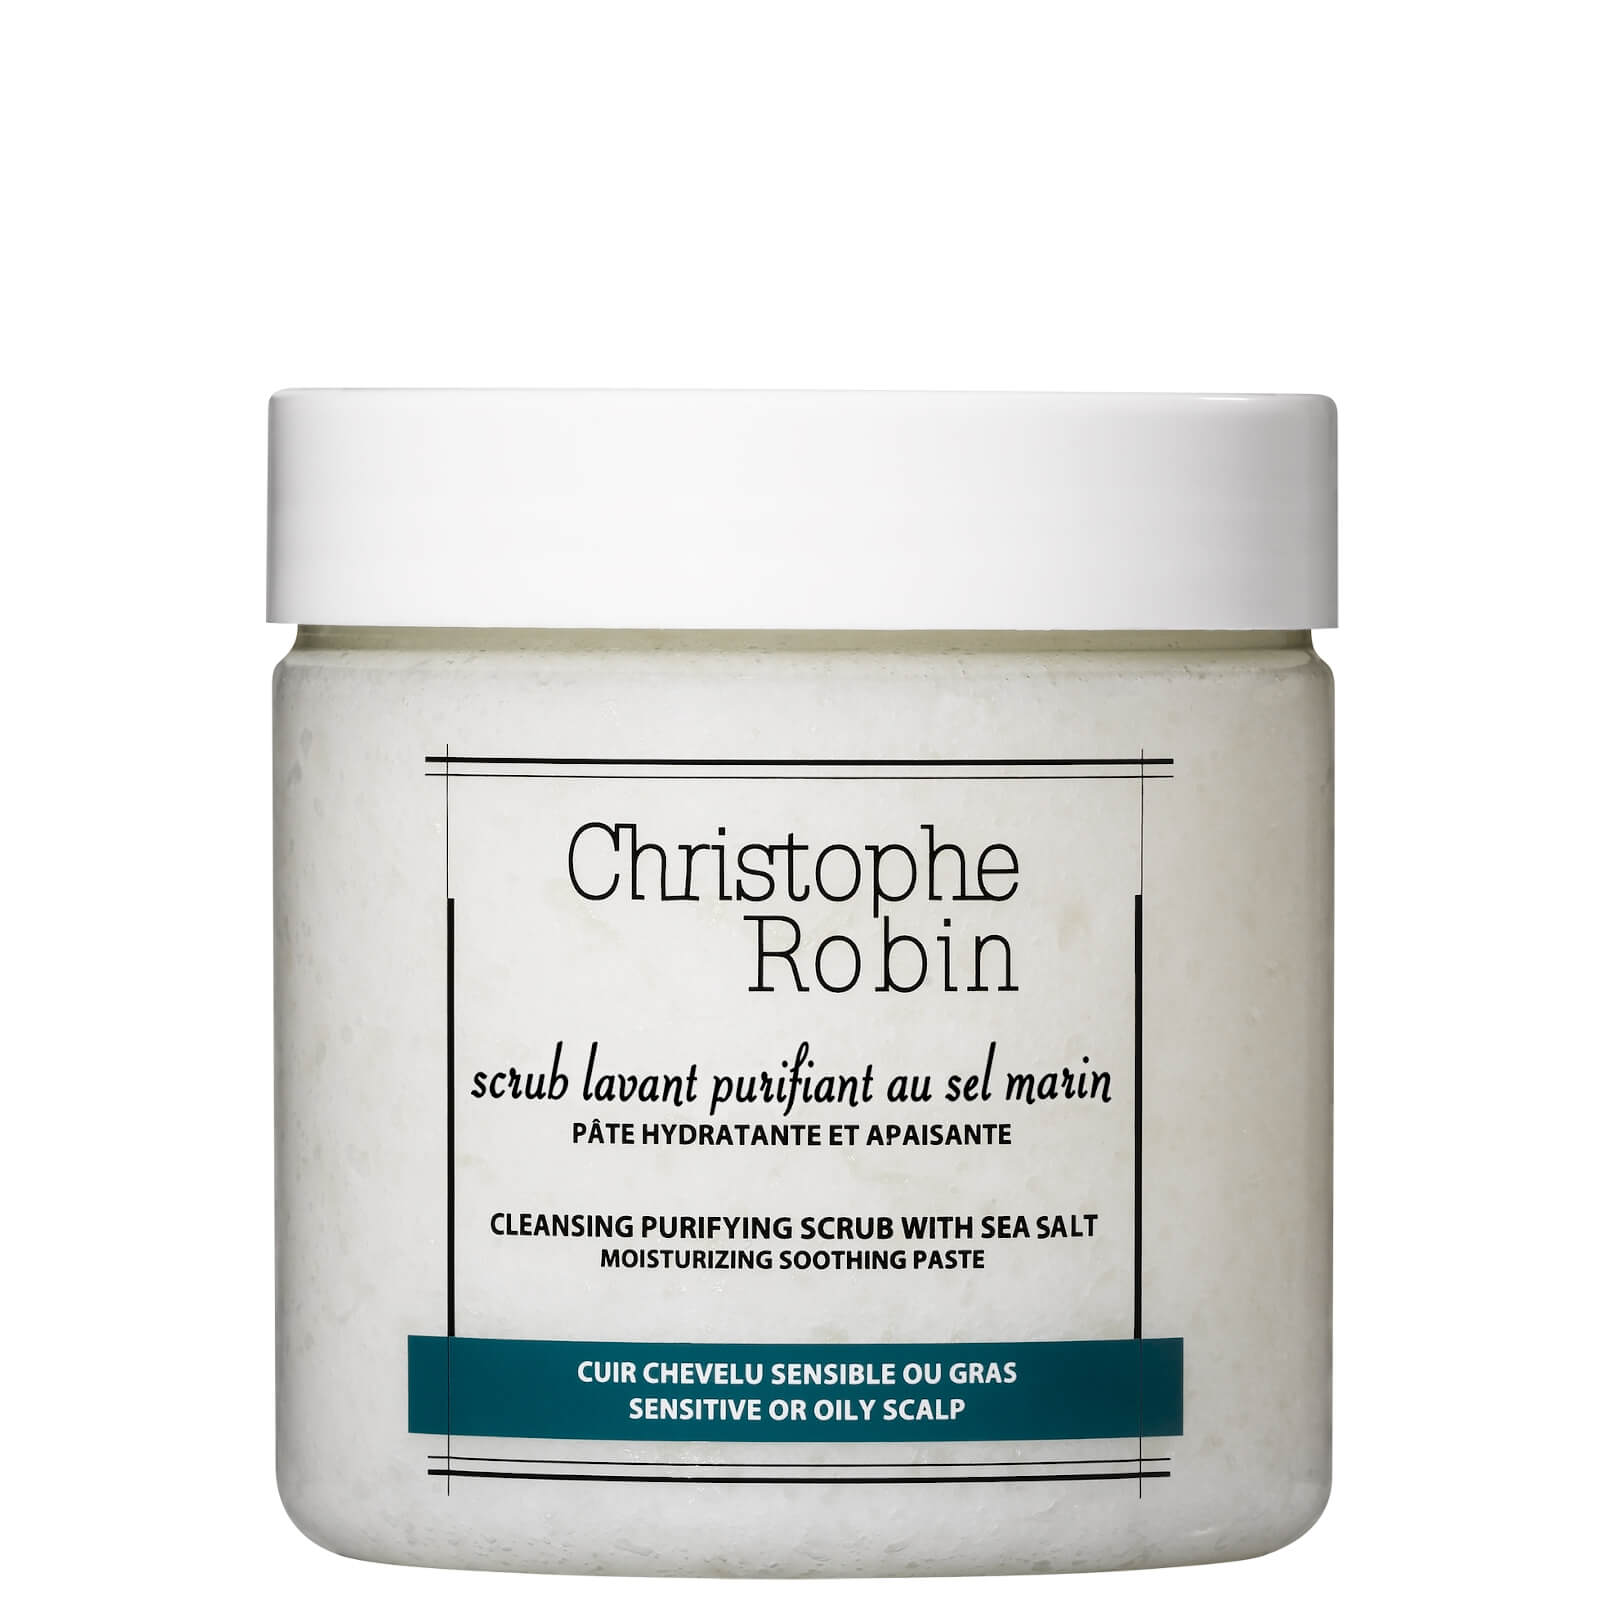 Photos - Facial / Body Cleansing Product Christophe Robin Cleansing Purifying Scrub with Sea Salt  SCRUB 250(250ml)